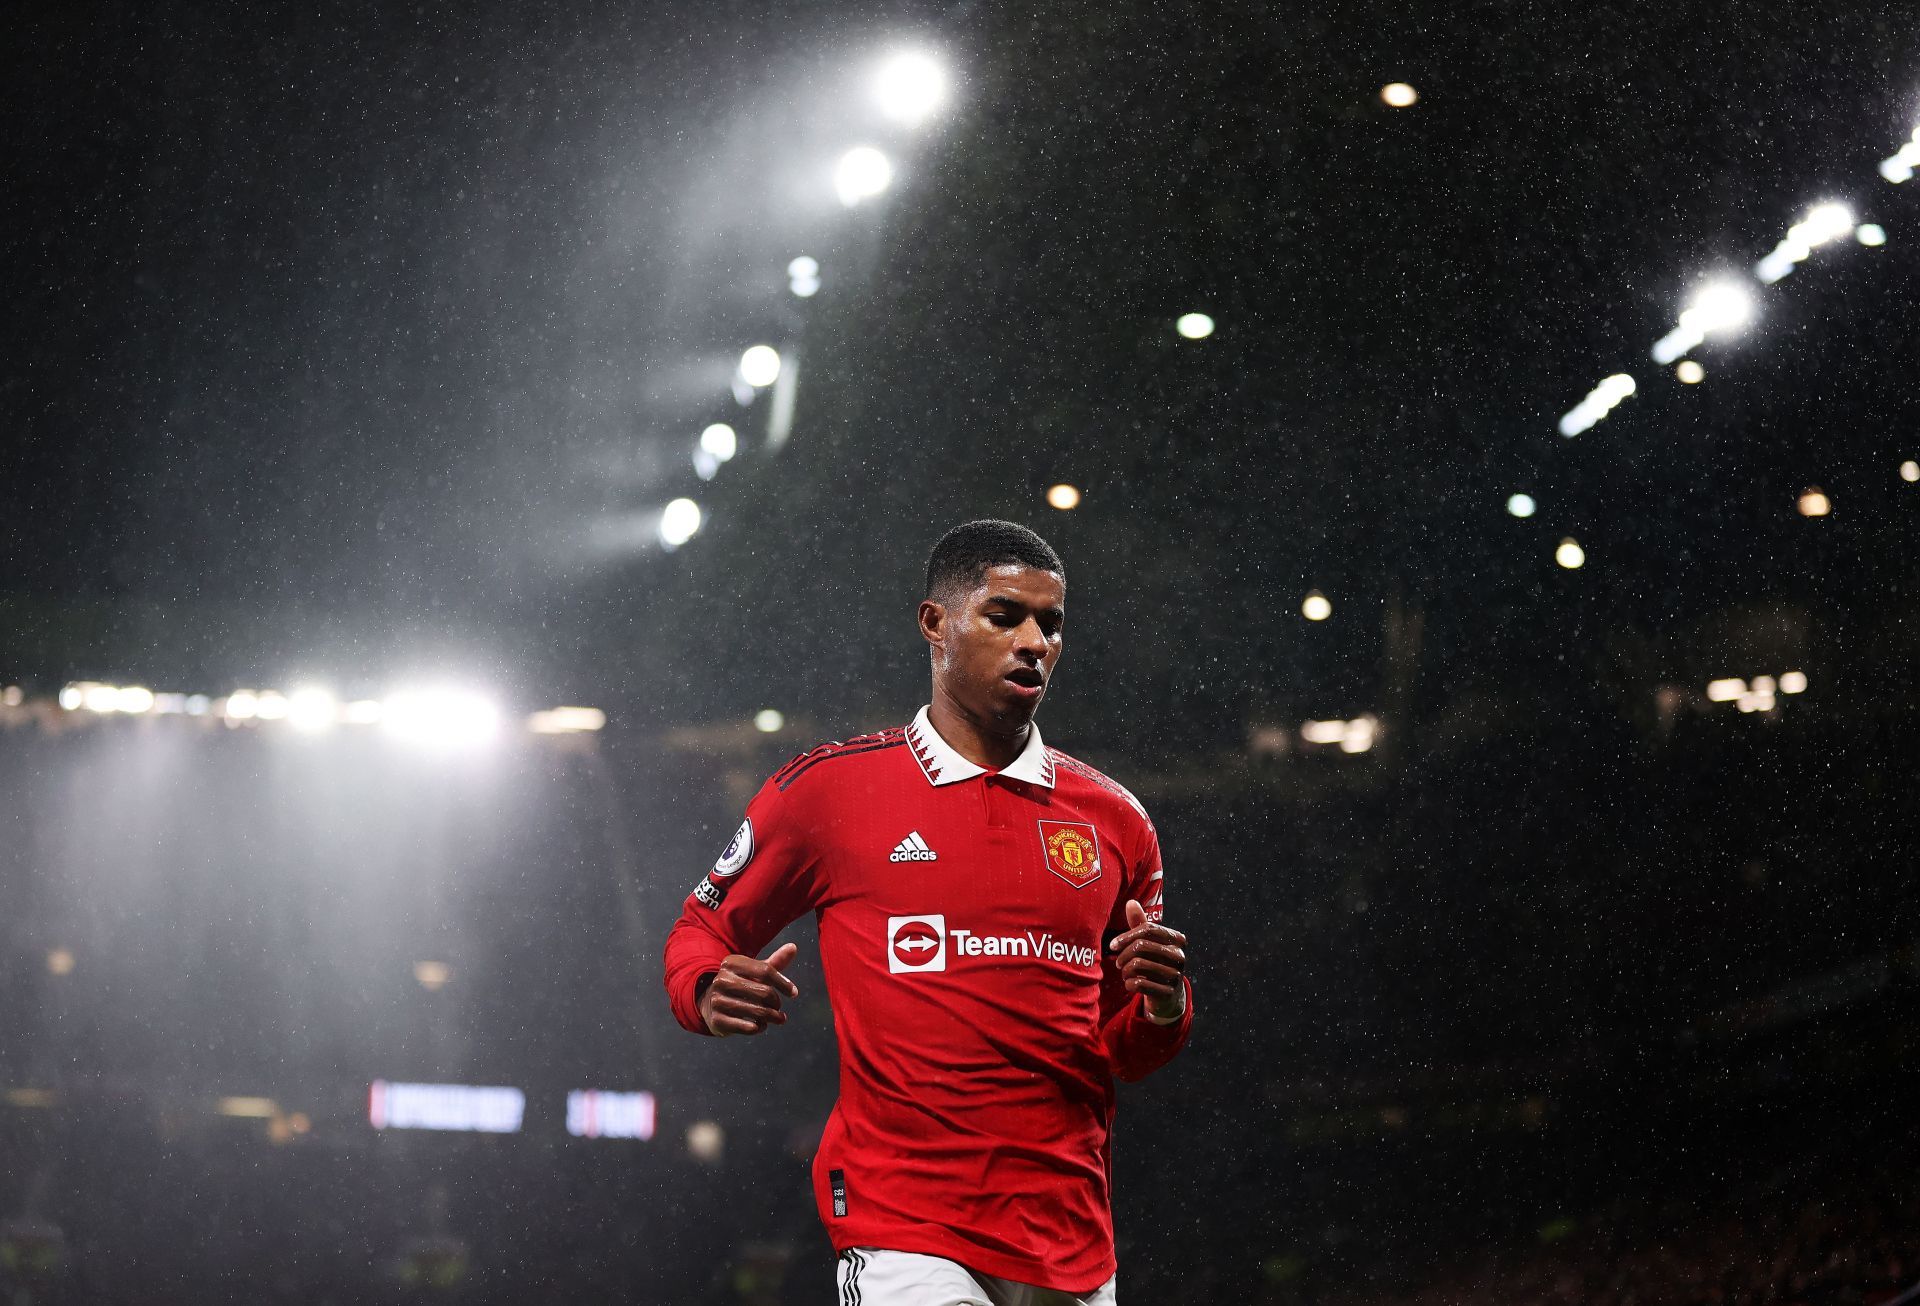 Rashford impressed in the win over Forest.